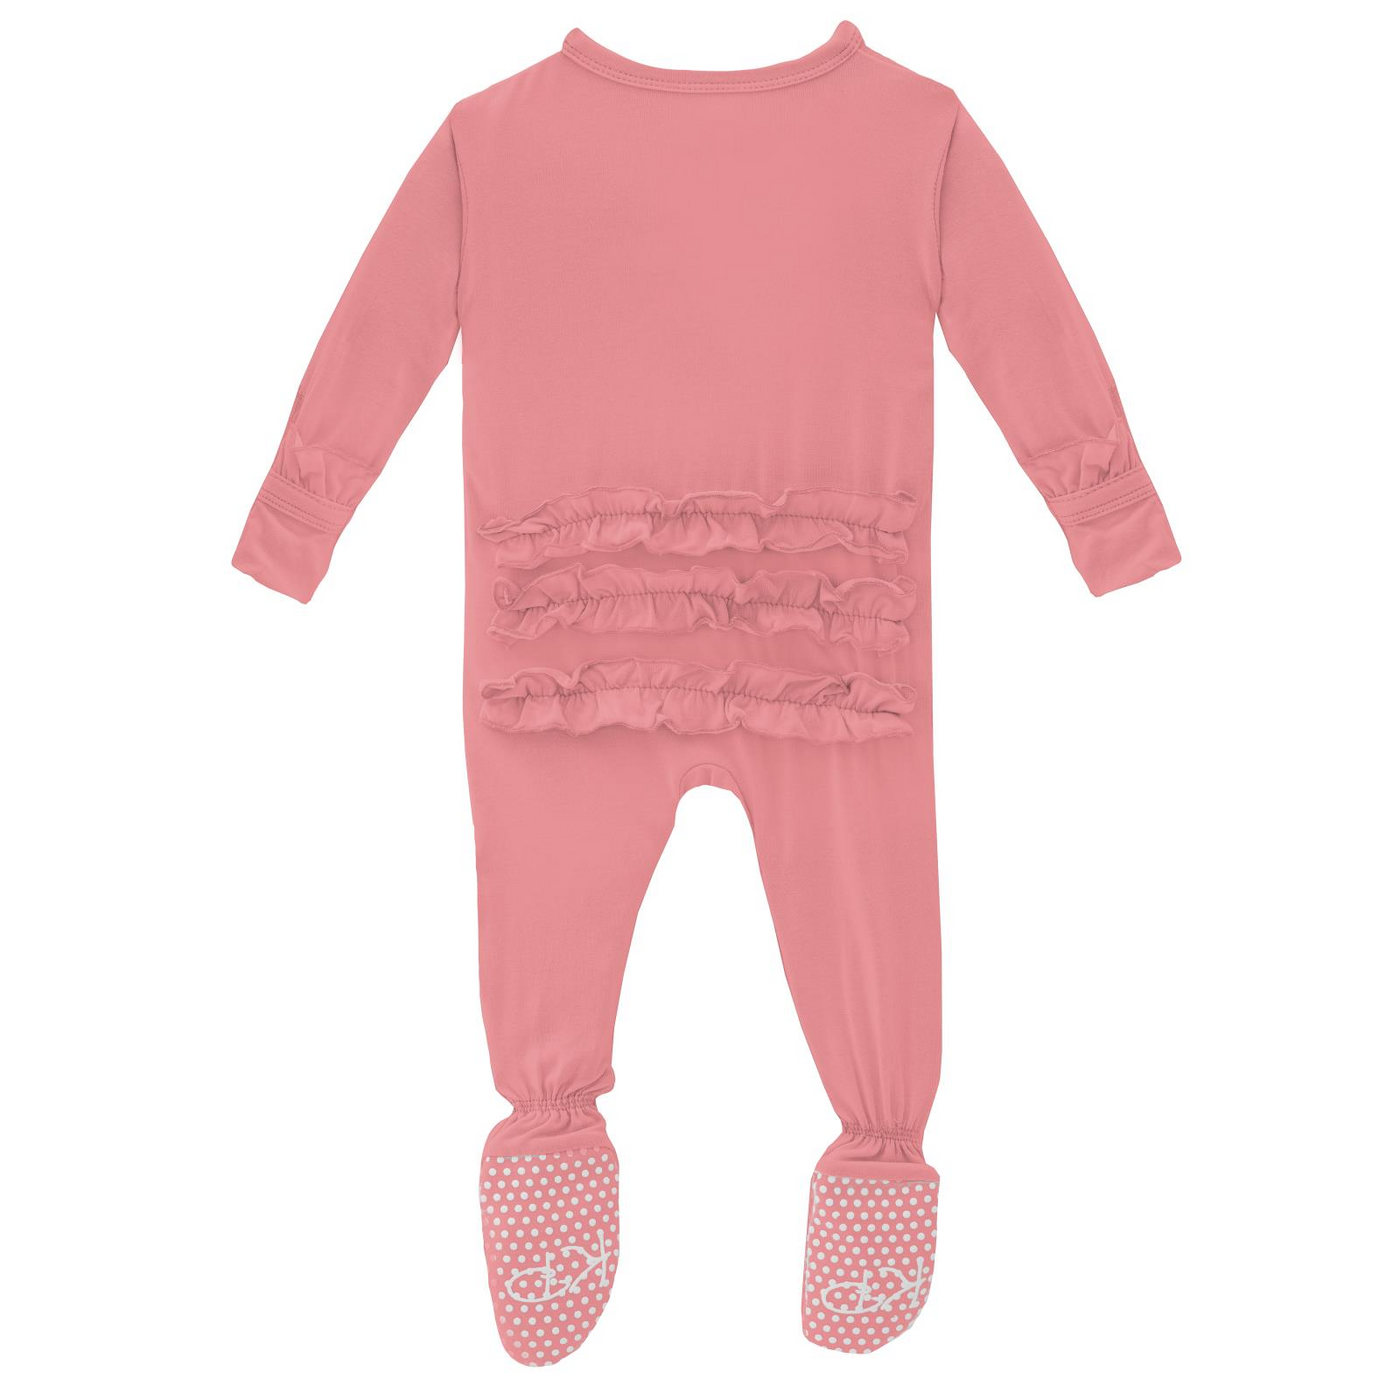 Kickee Pants Classic Ruffle Footie with 2 Way Zipper: Solid Strawberry